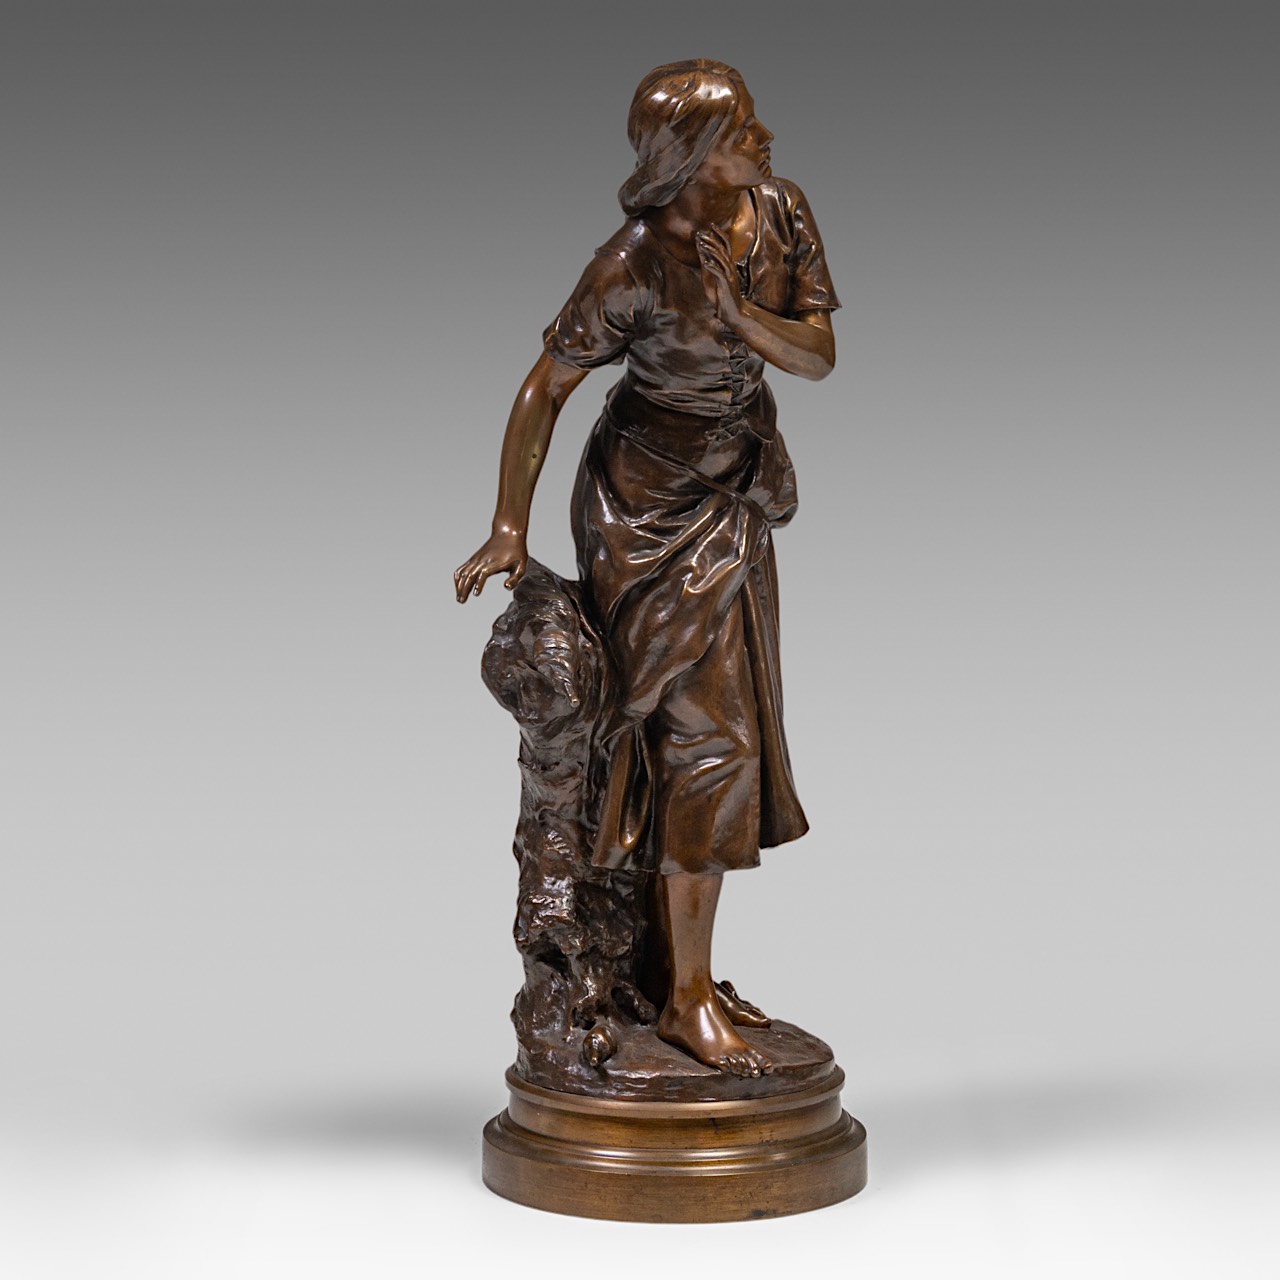 Mathurin Moreau (1822-1912), the spinner, patinated bronze, Hors Concours, H 89 cm - Image 2 of 8